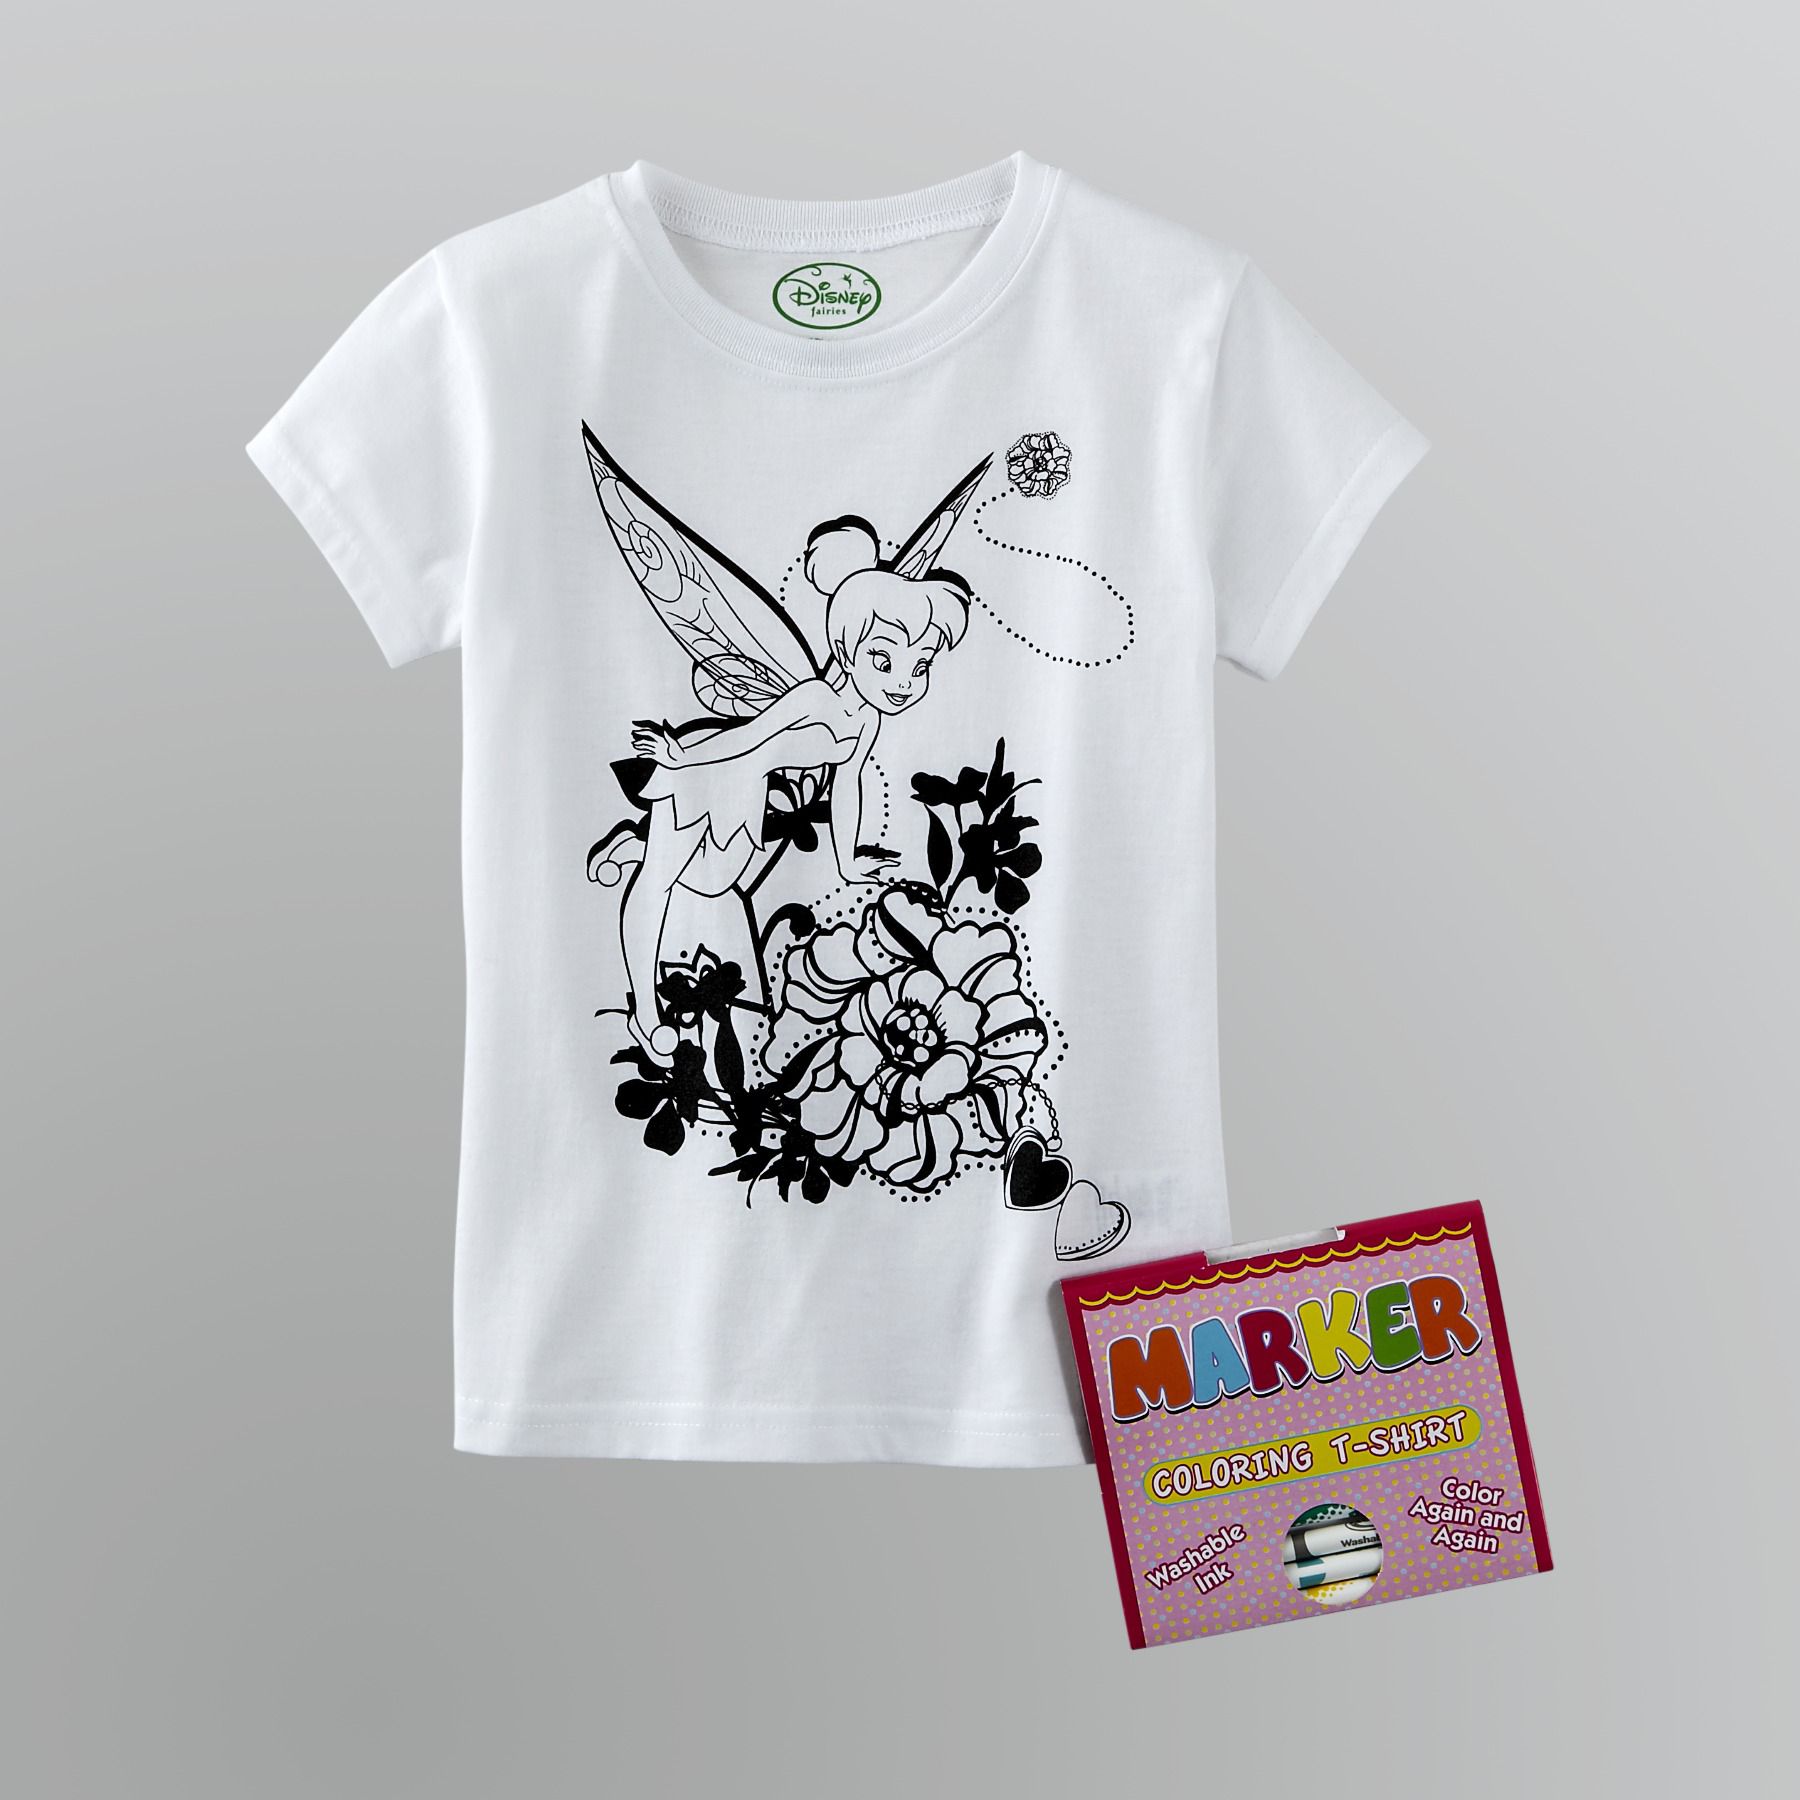 Disney Girl's Tinker Bell Color Your Own T-Shirt